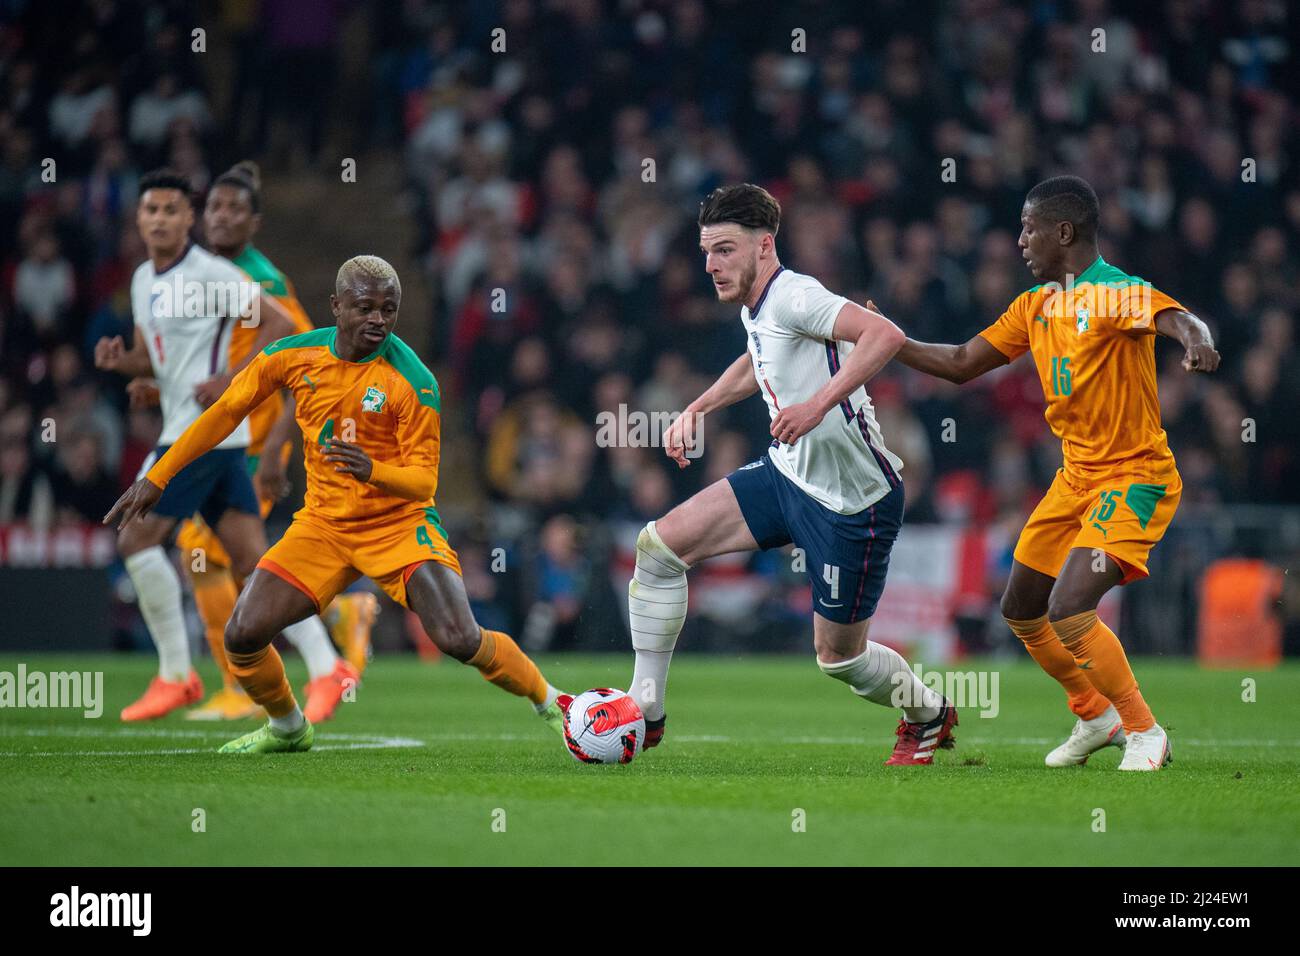 LONDON, ENGLAND - MARCH 29: Declan Rice of England and Jean Michael Seri and Max Gradel of Ivory Coast during the International Friendly match between England and Ivory Coast at Wembley Stadium on March 29, 2022 in London, England. (Photo by Sebastian Frej) Credit: Sebo47/Alamy Live News Stock Photo